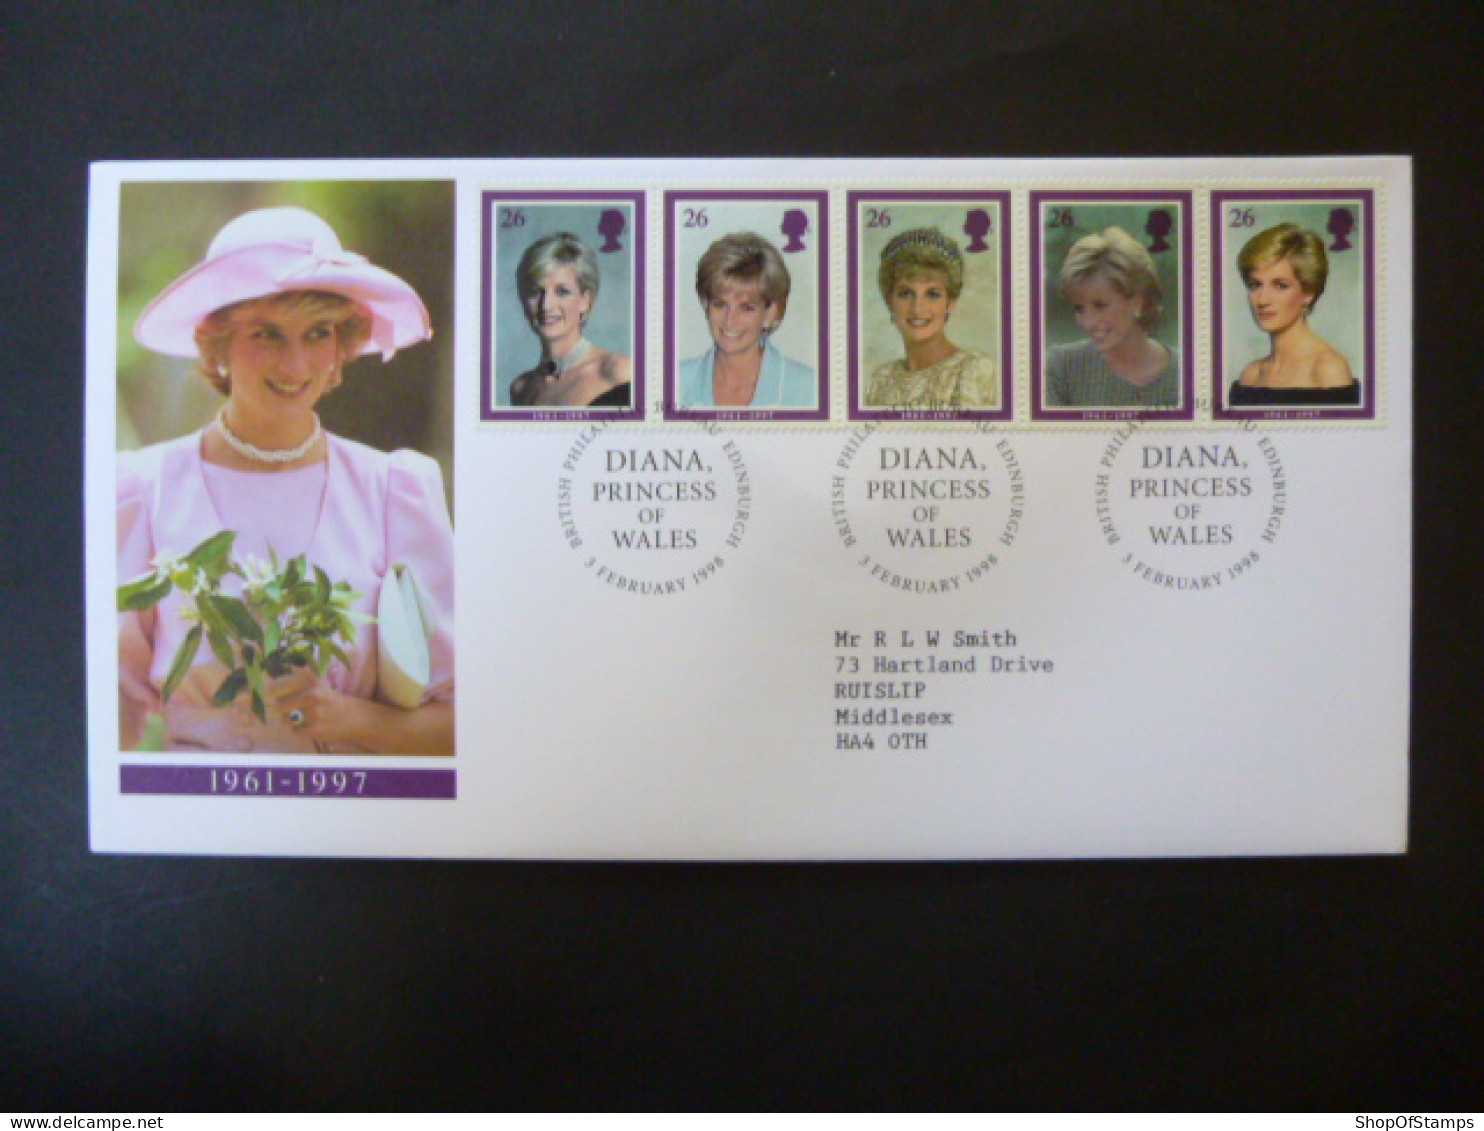 GREAT BRITAIN SG 2021-25 DIANA PRINCESS OF WALES COMMEMORATION FDC EDINBURGH - Unclassified